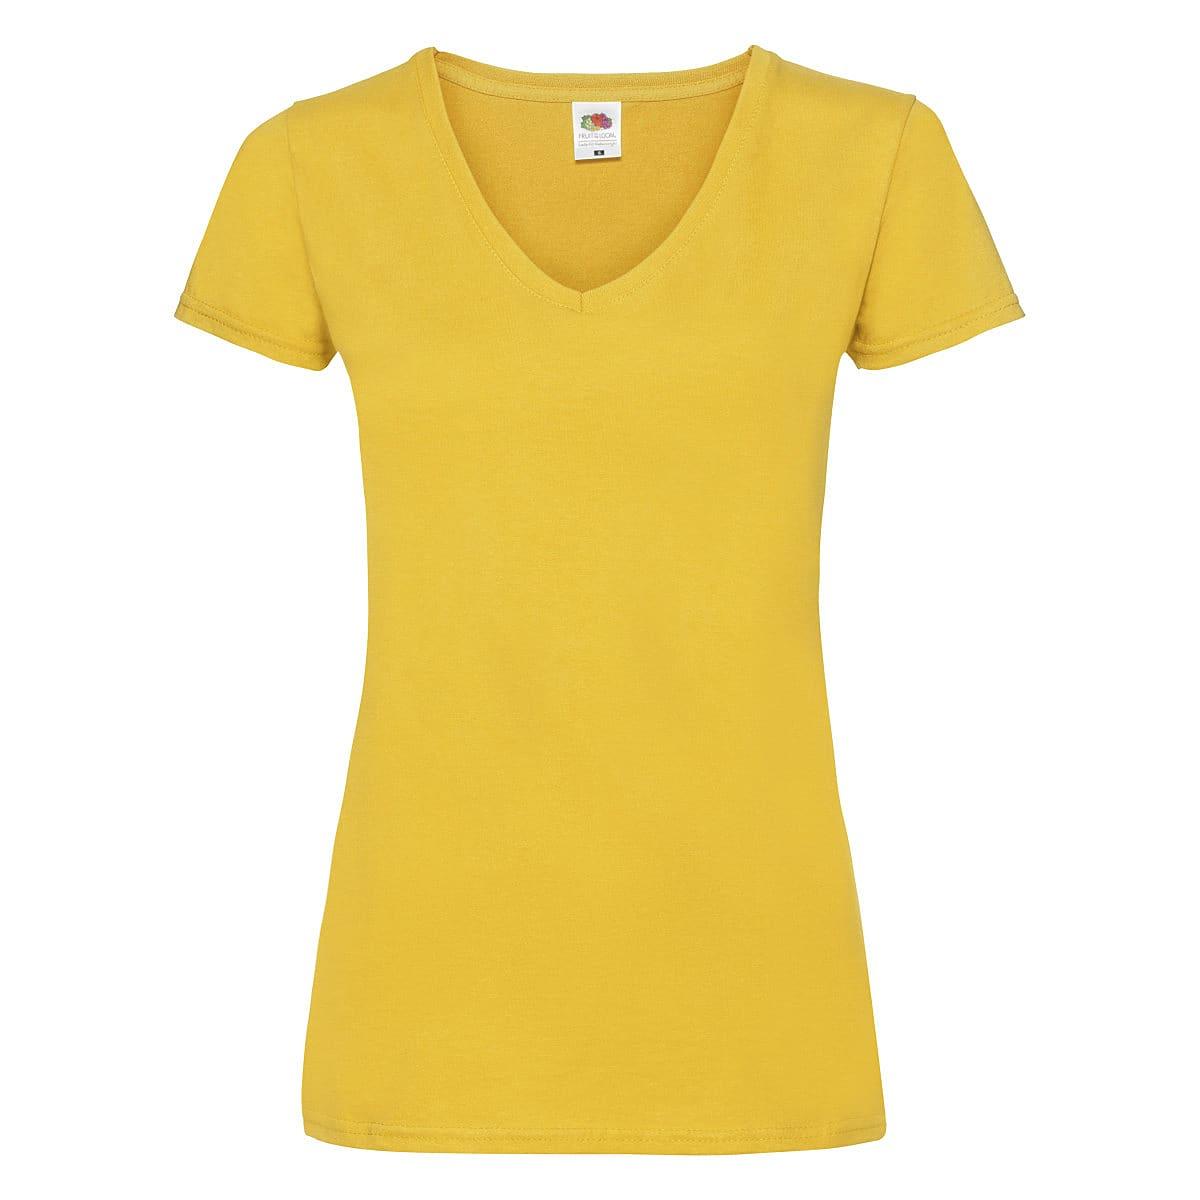 Fruit Of The Loom Lady-Fit Valueweight V-Neck T-Shirt in Sunflower (Product Code: 61398)